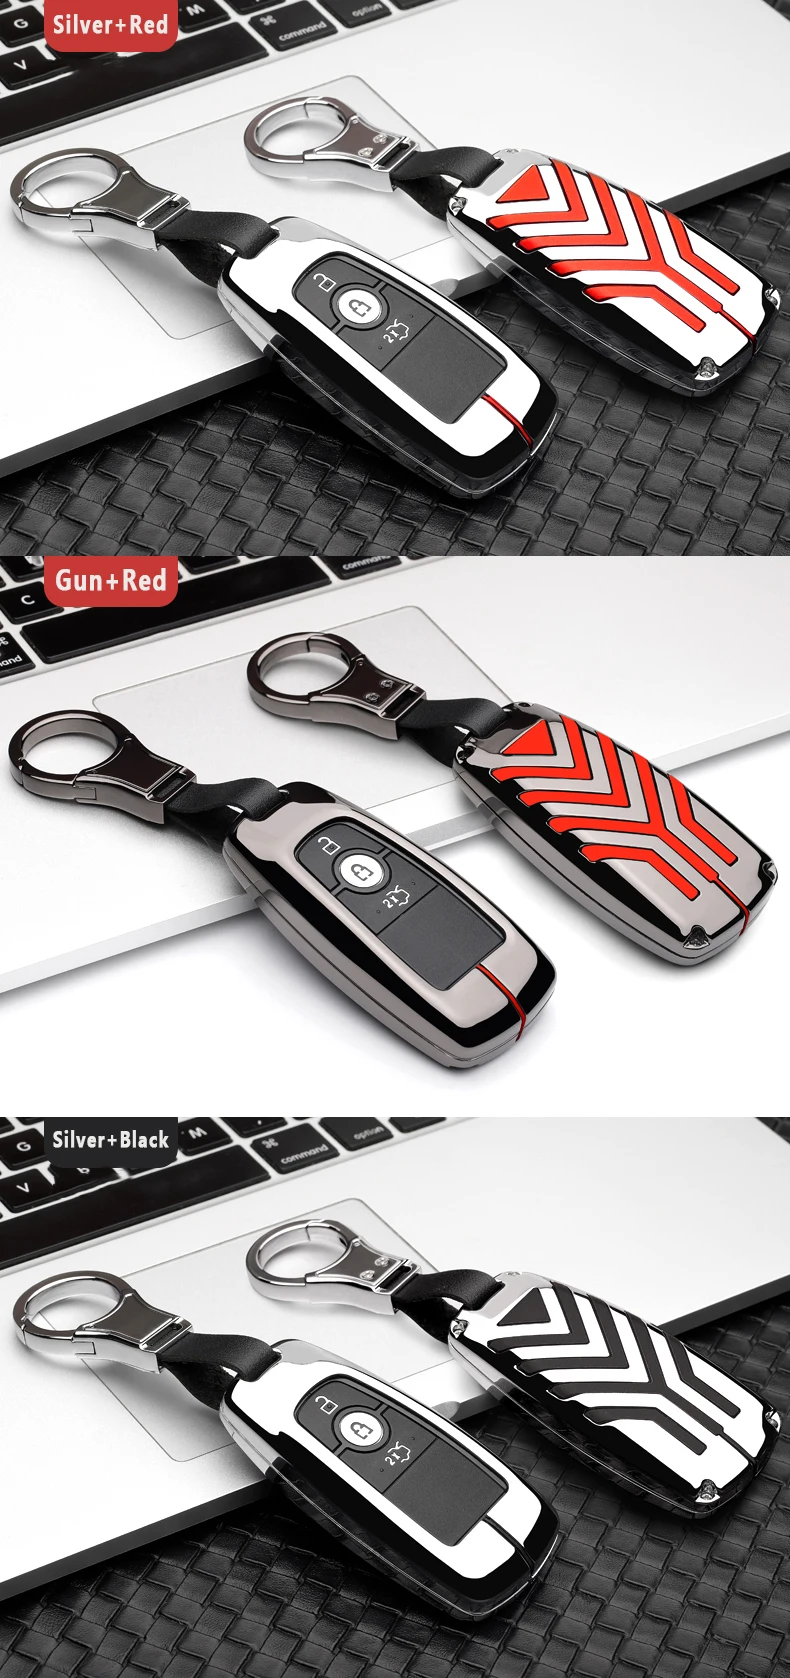 Car styling key case remote control keychain For Ford key cover Focus MK3 MK4 Mondeo galaxy ecosport Kuga ST Automotive products